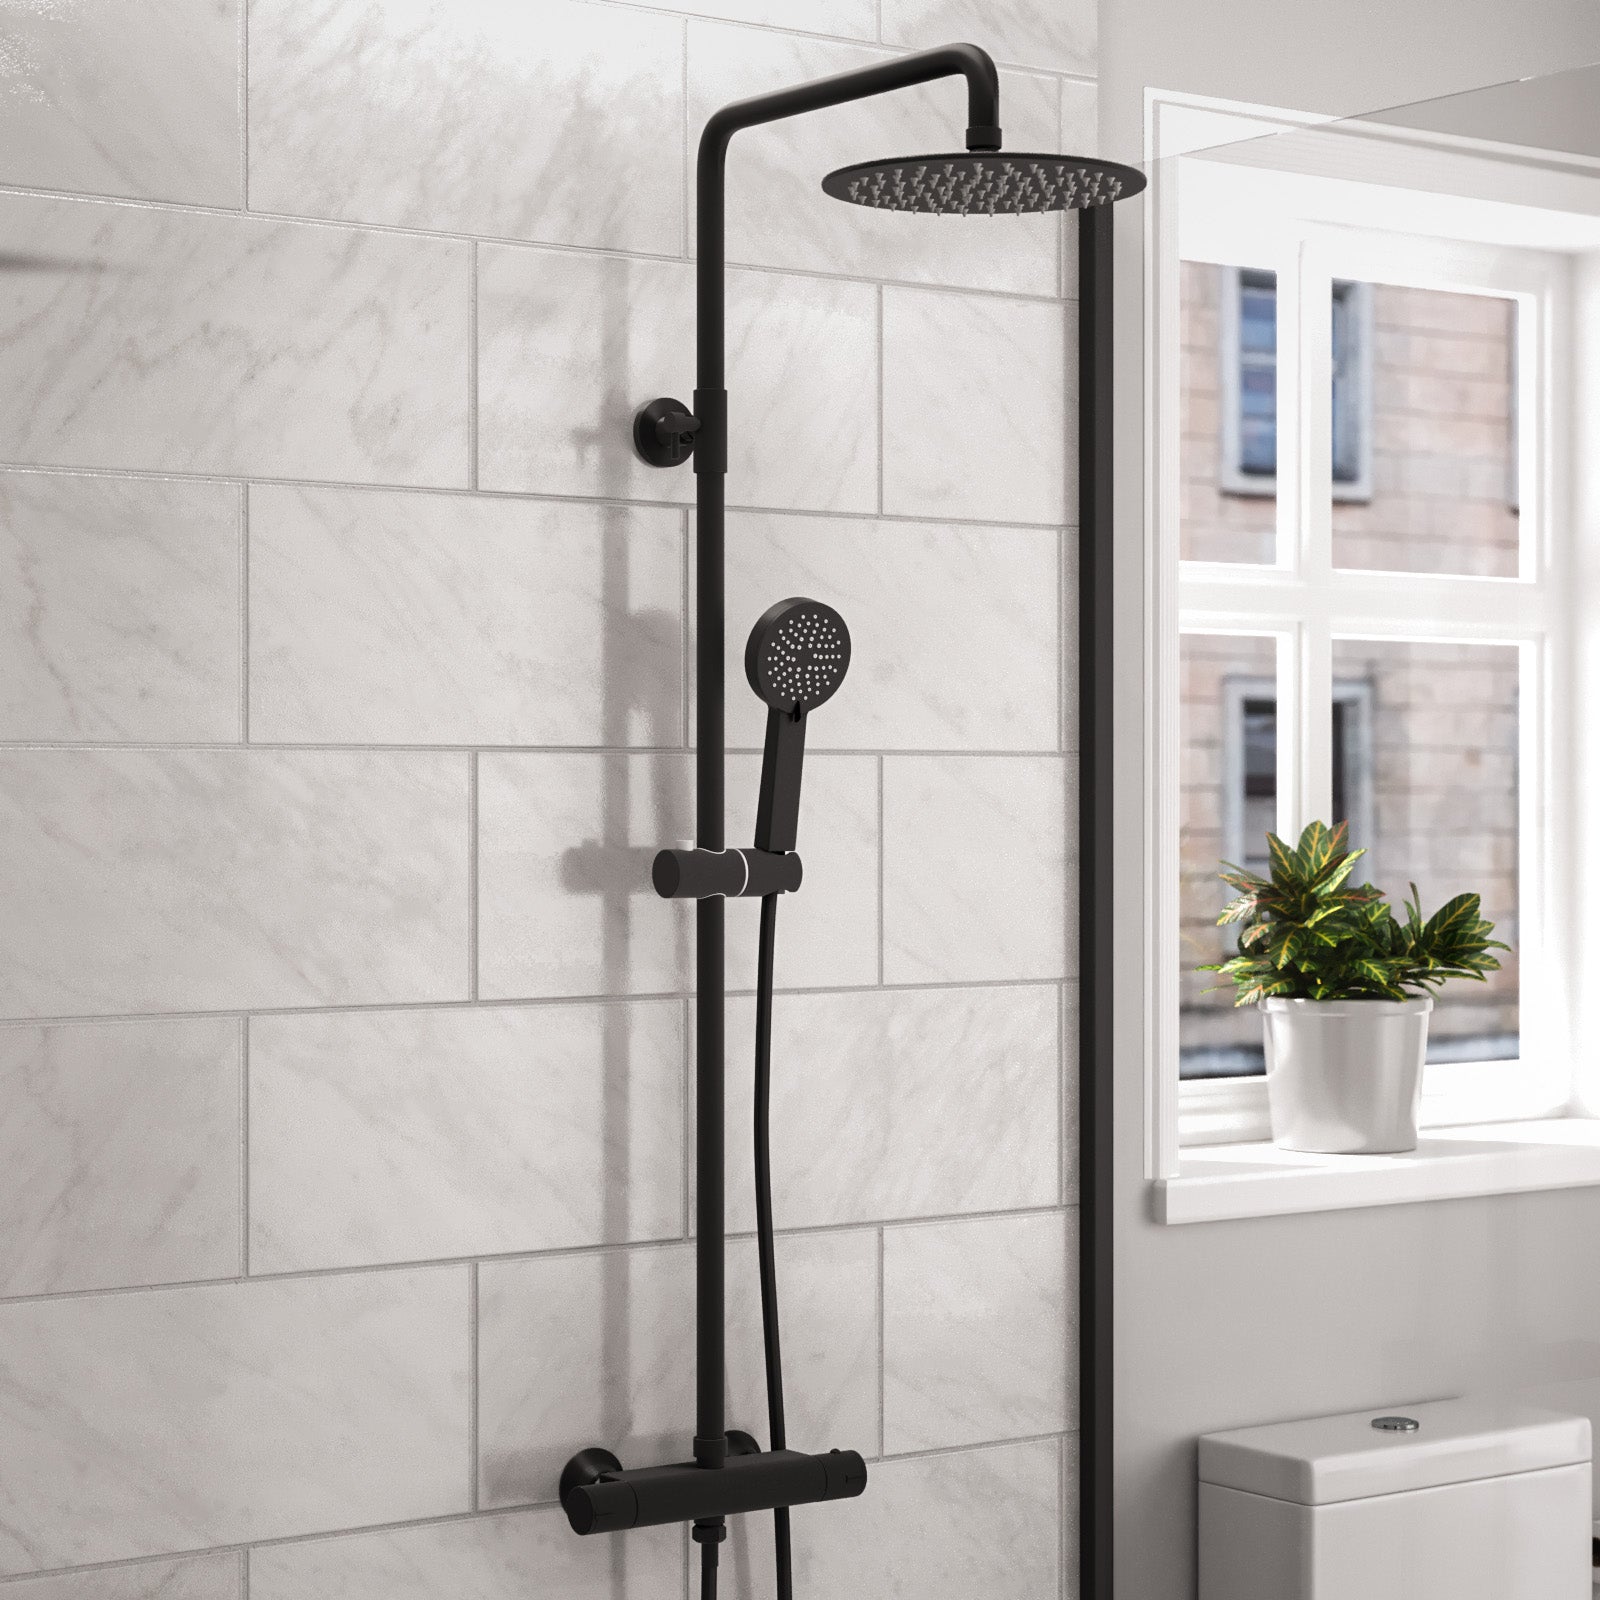 Modern Round Matte Black Exposed Thermostatic Mixer Shower Set With Shower Head and Handheld